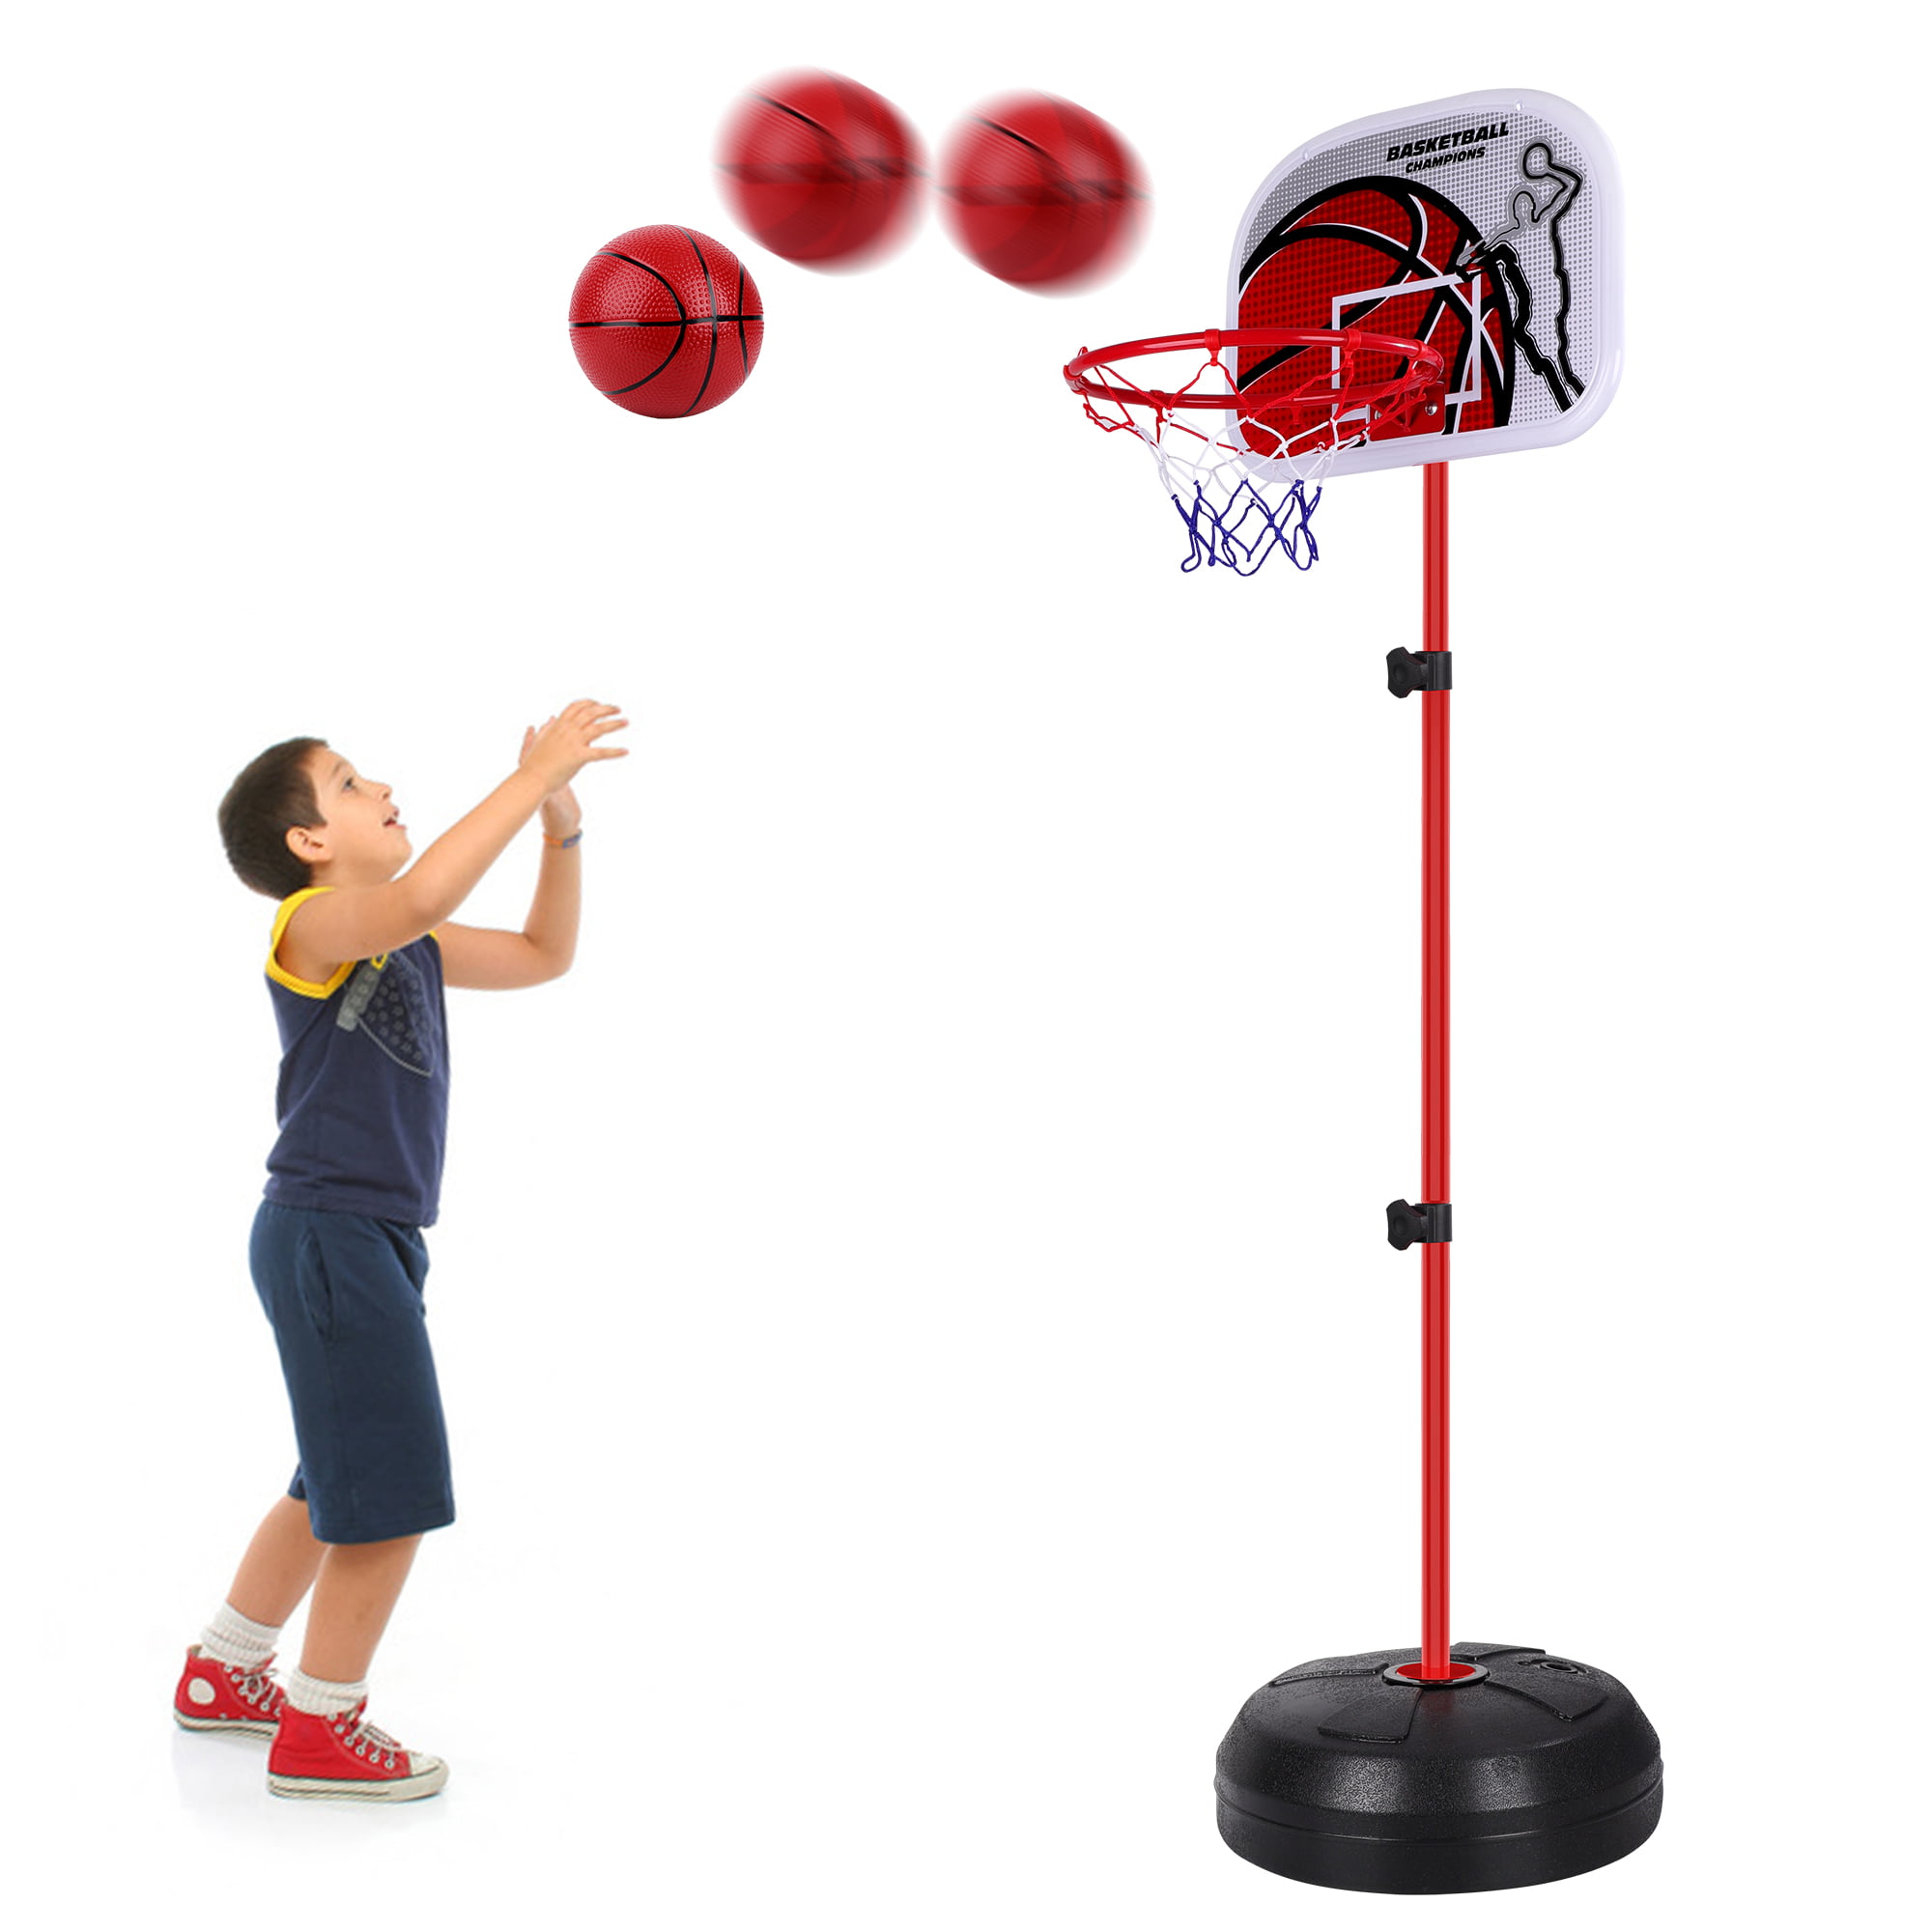 Adjustable Height Up to 6 Feet for Indoor Outdoor Basketball Game Mini Basketball Goal Toy with Ball Pump for Kids Boys Girls Outdoor Play Sport FiGoal Portable Basketball Hoop for Kids 